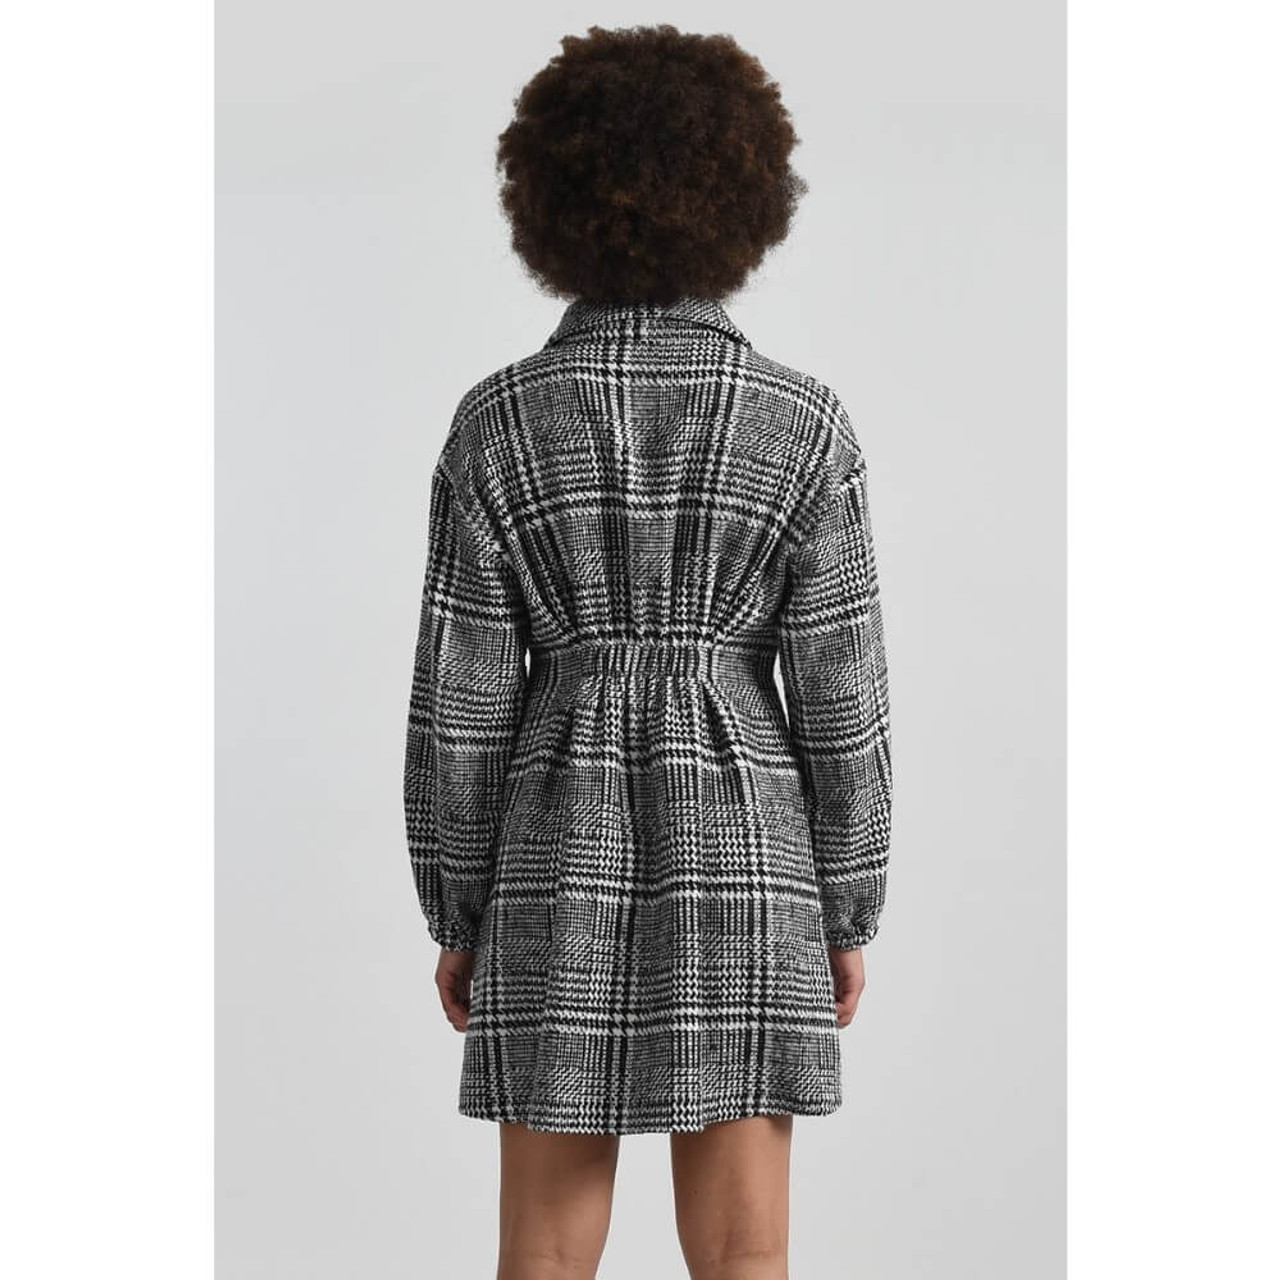 Molly Bracken Lili Sidonio Black and White Houdstooth Plaid Fit and Flare Coat Dress